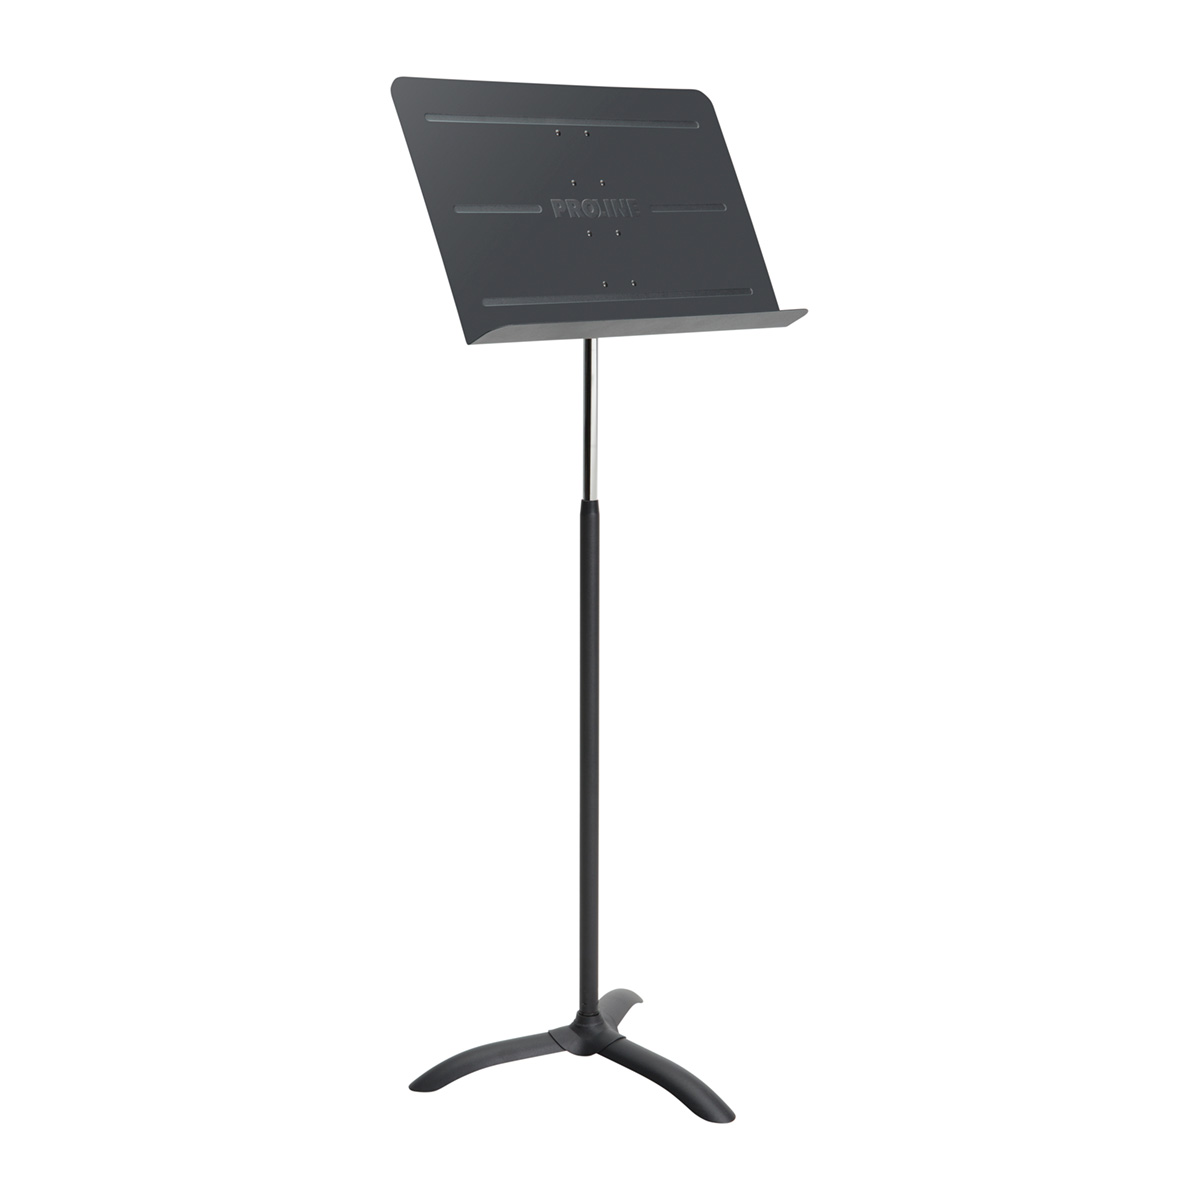 Proline MS300 Professional Orchestral Music Stand